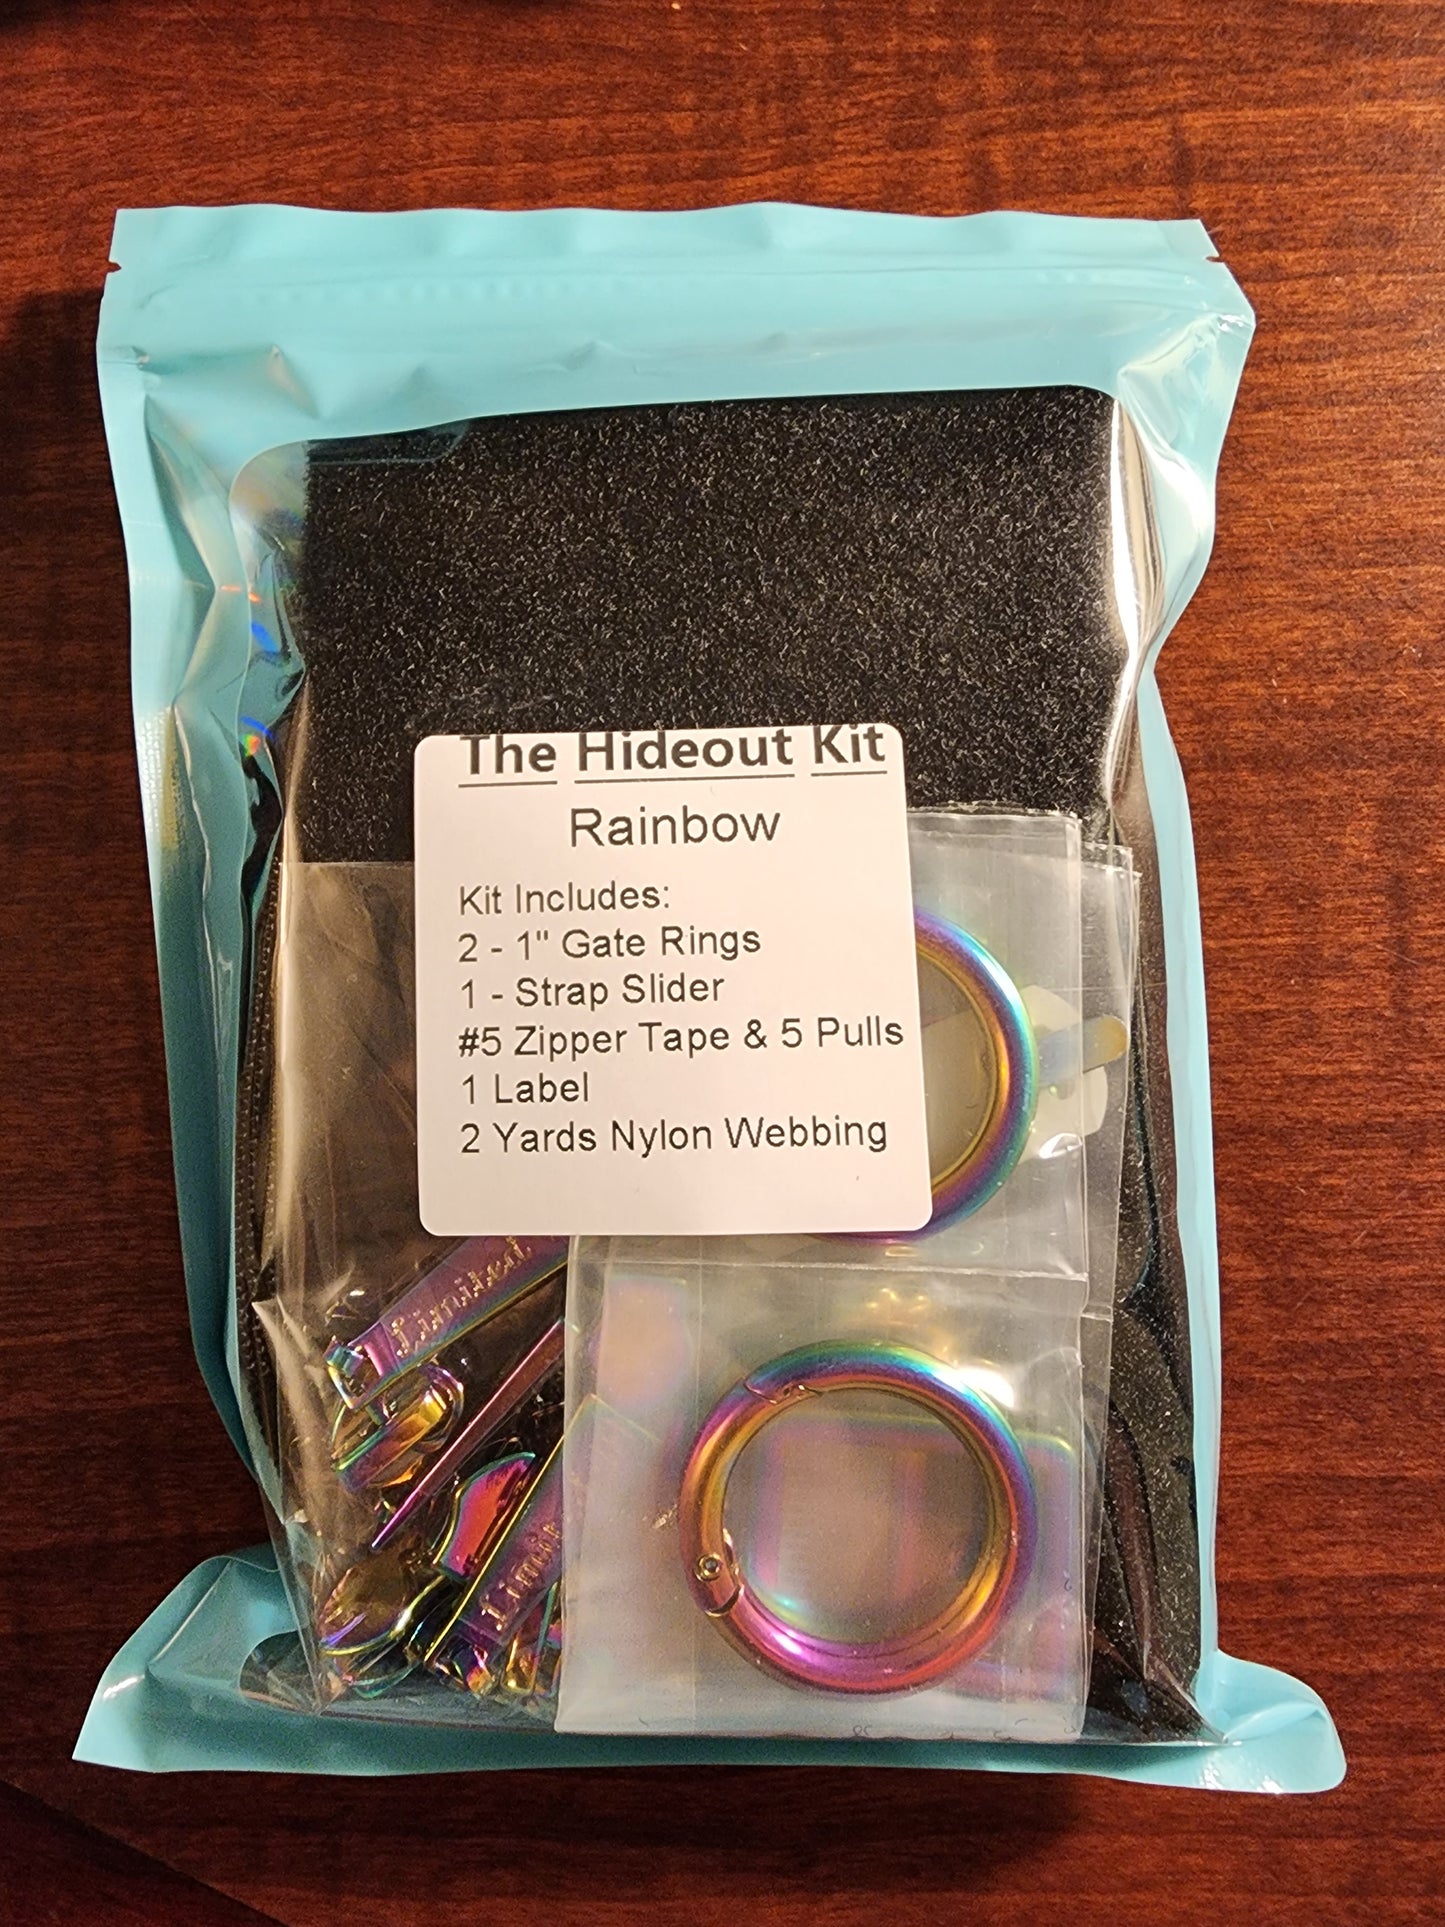 The Hideout Kit